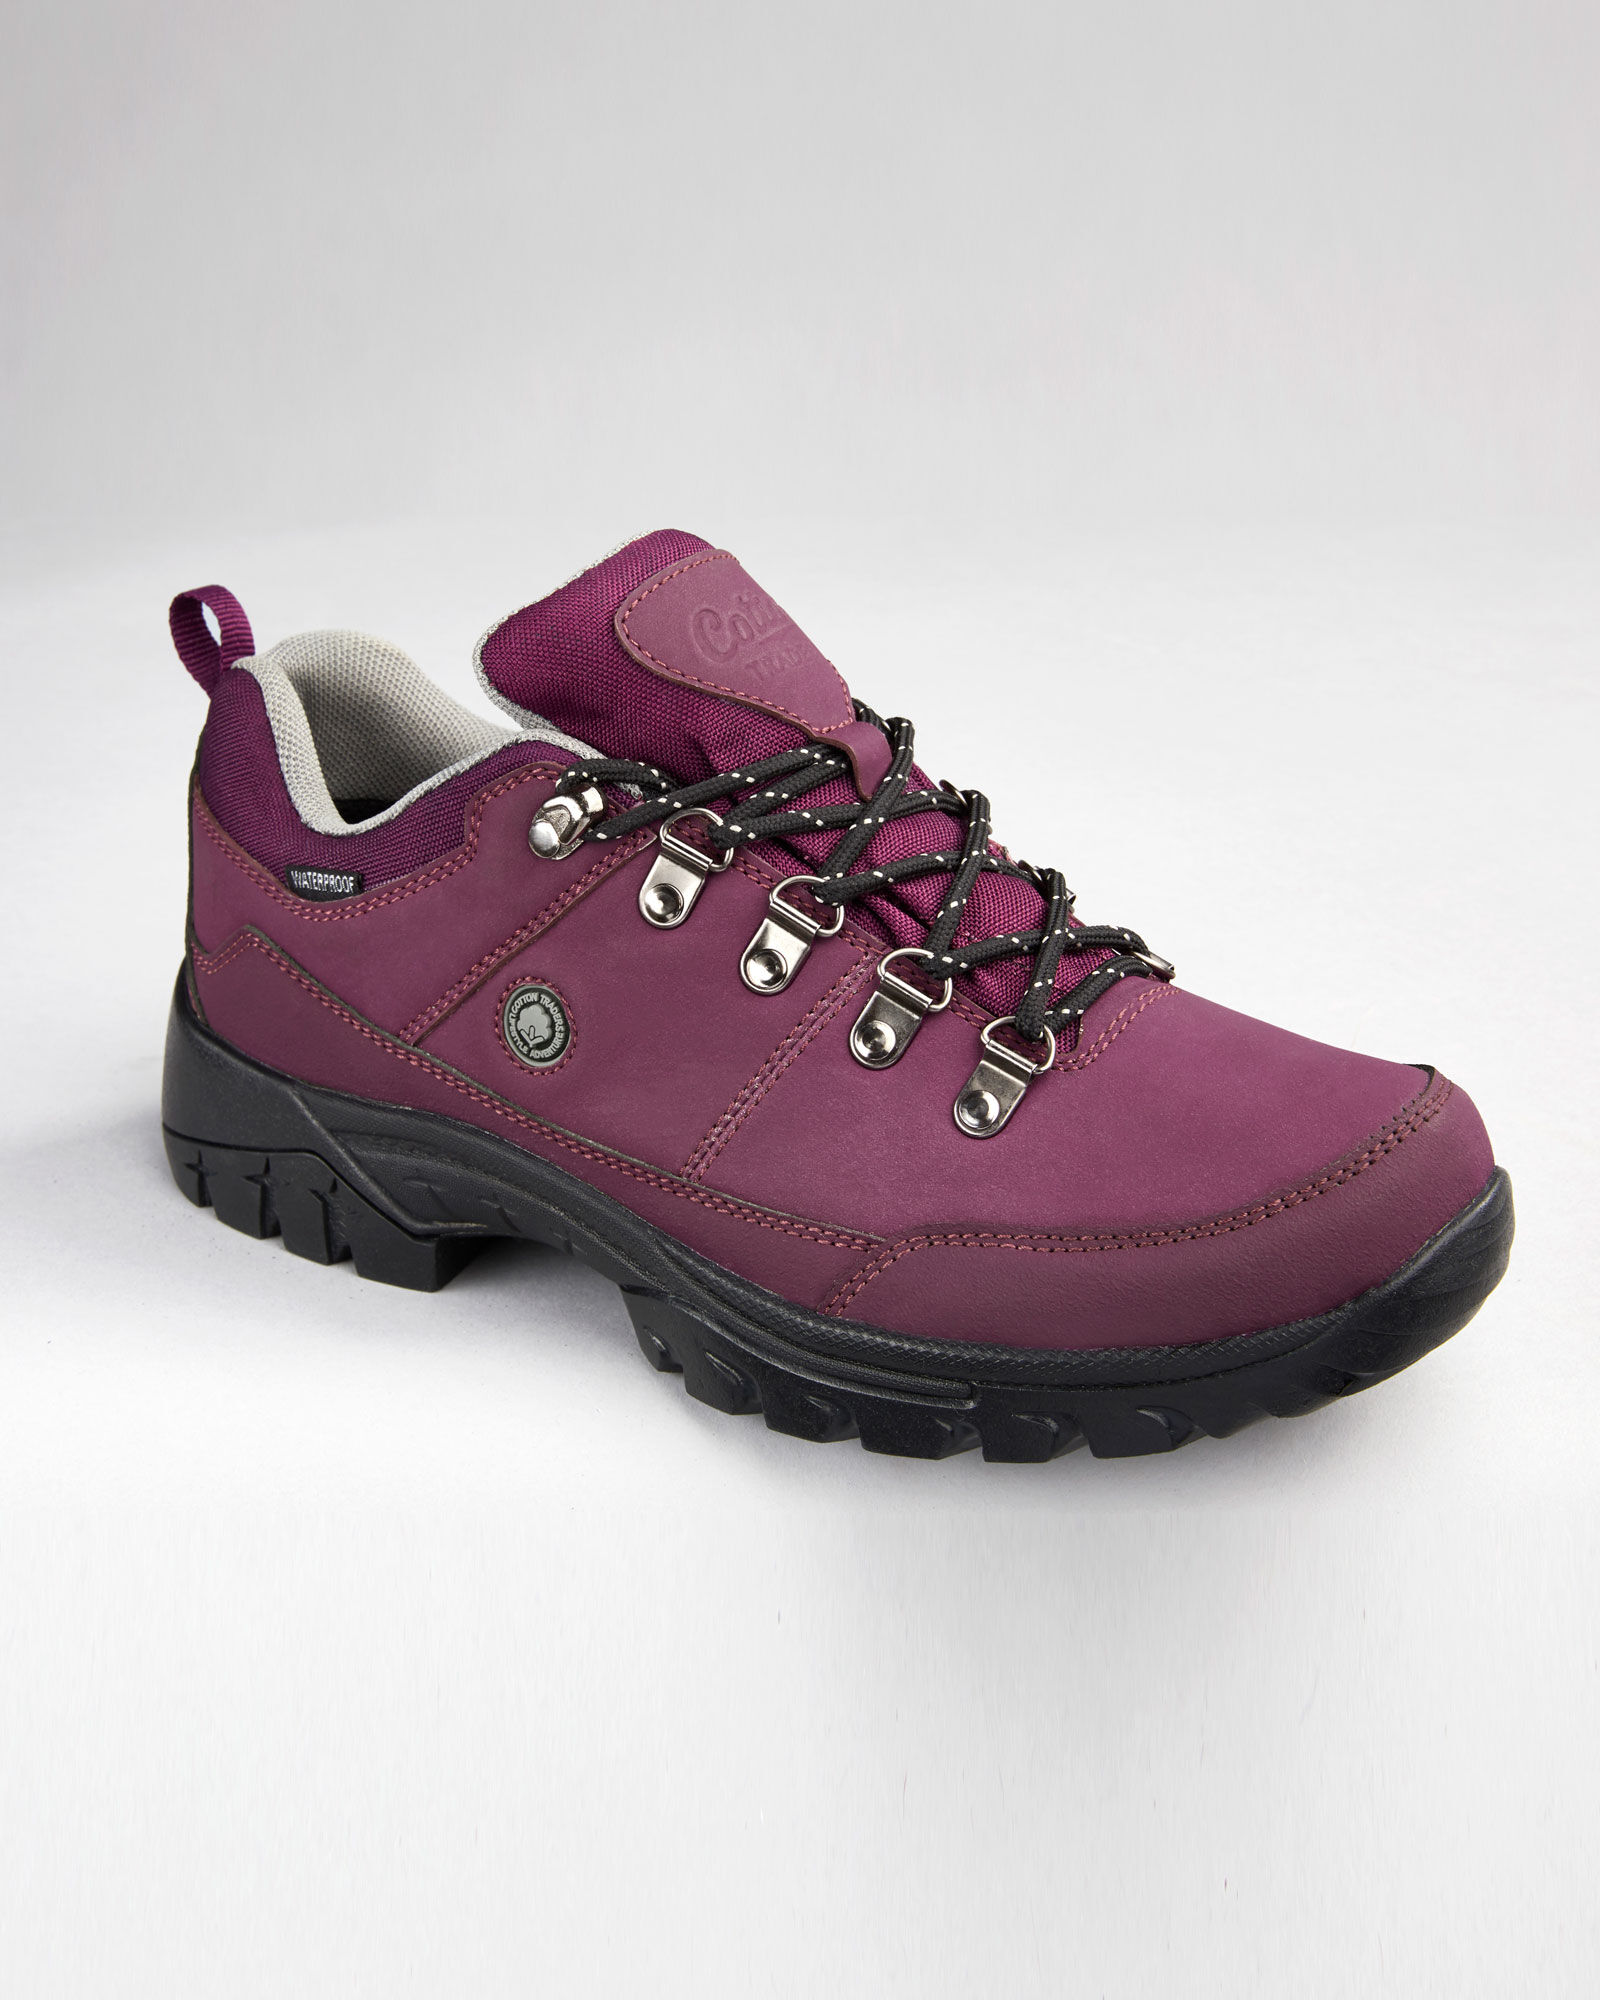 cotton traders hiking boots